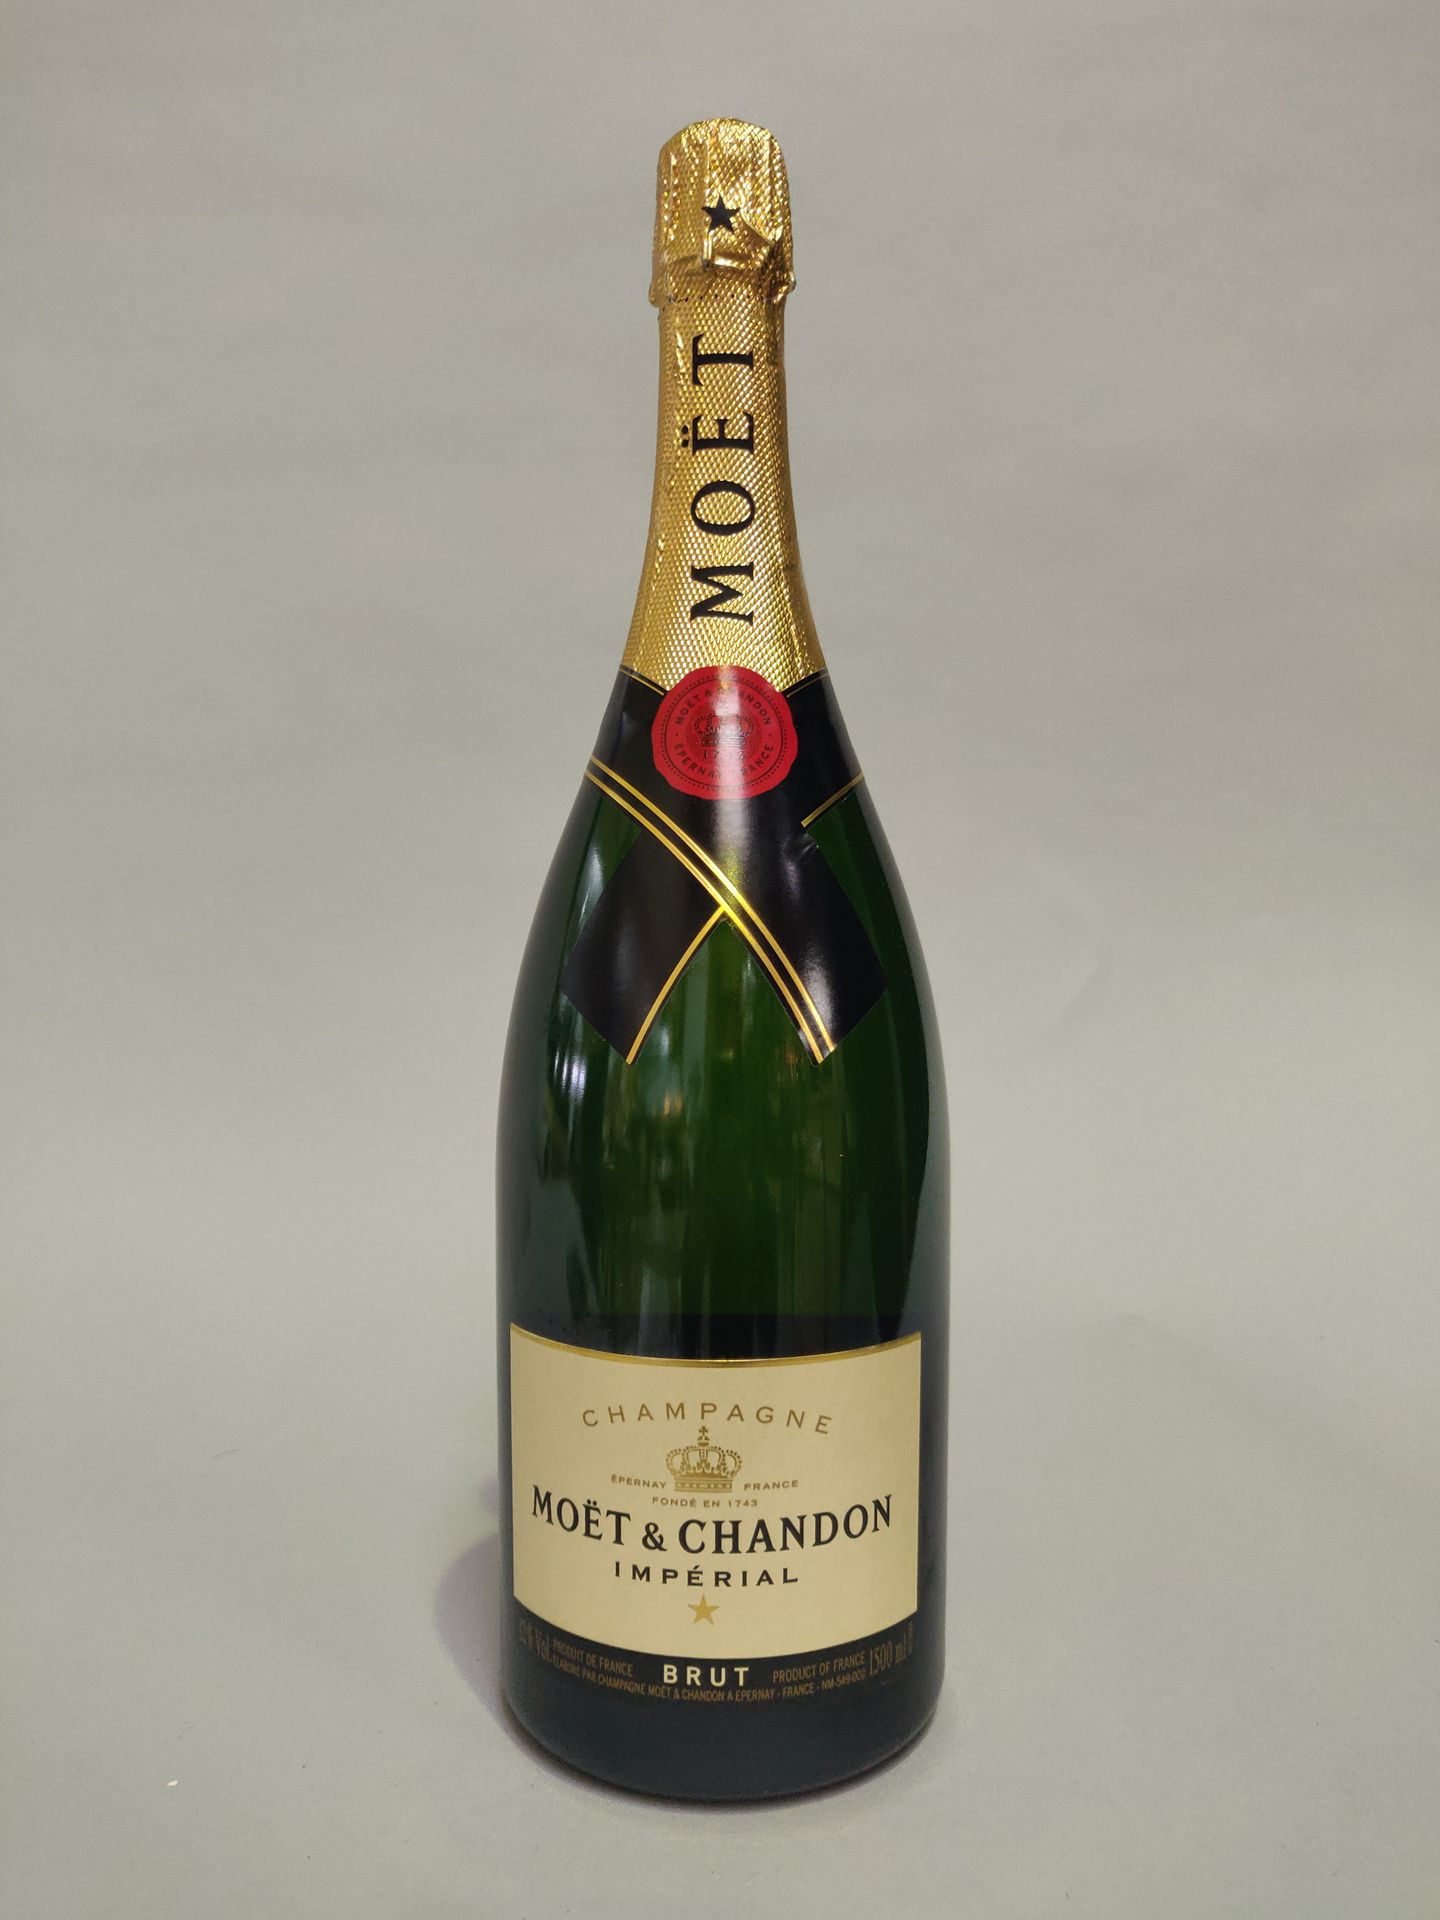 champagne moet hennessy